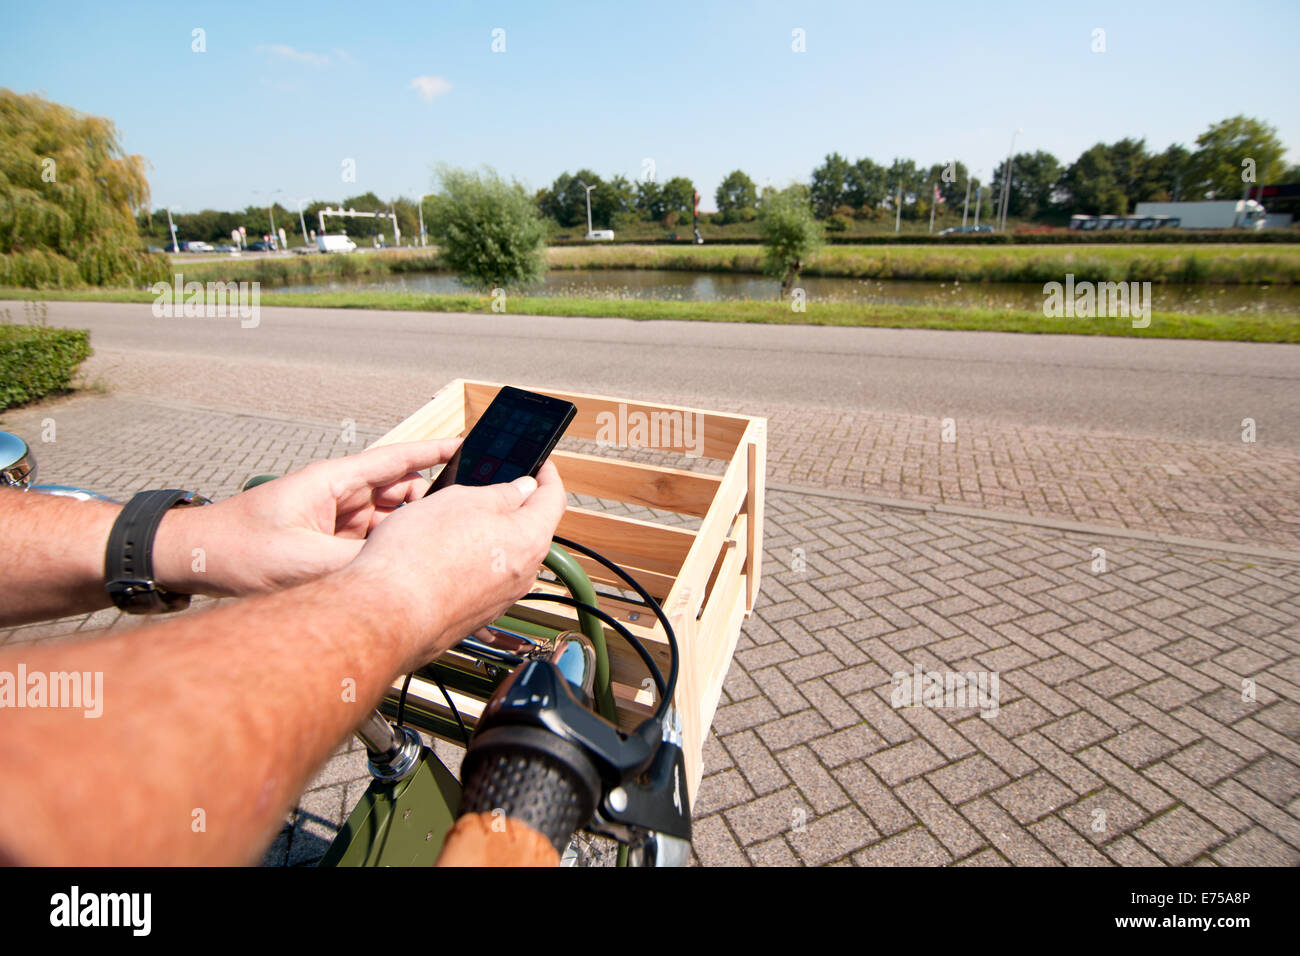 Man riding on a bike with a smartphone in his hand Stock Photo